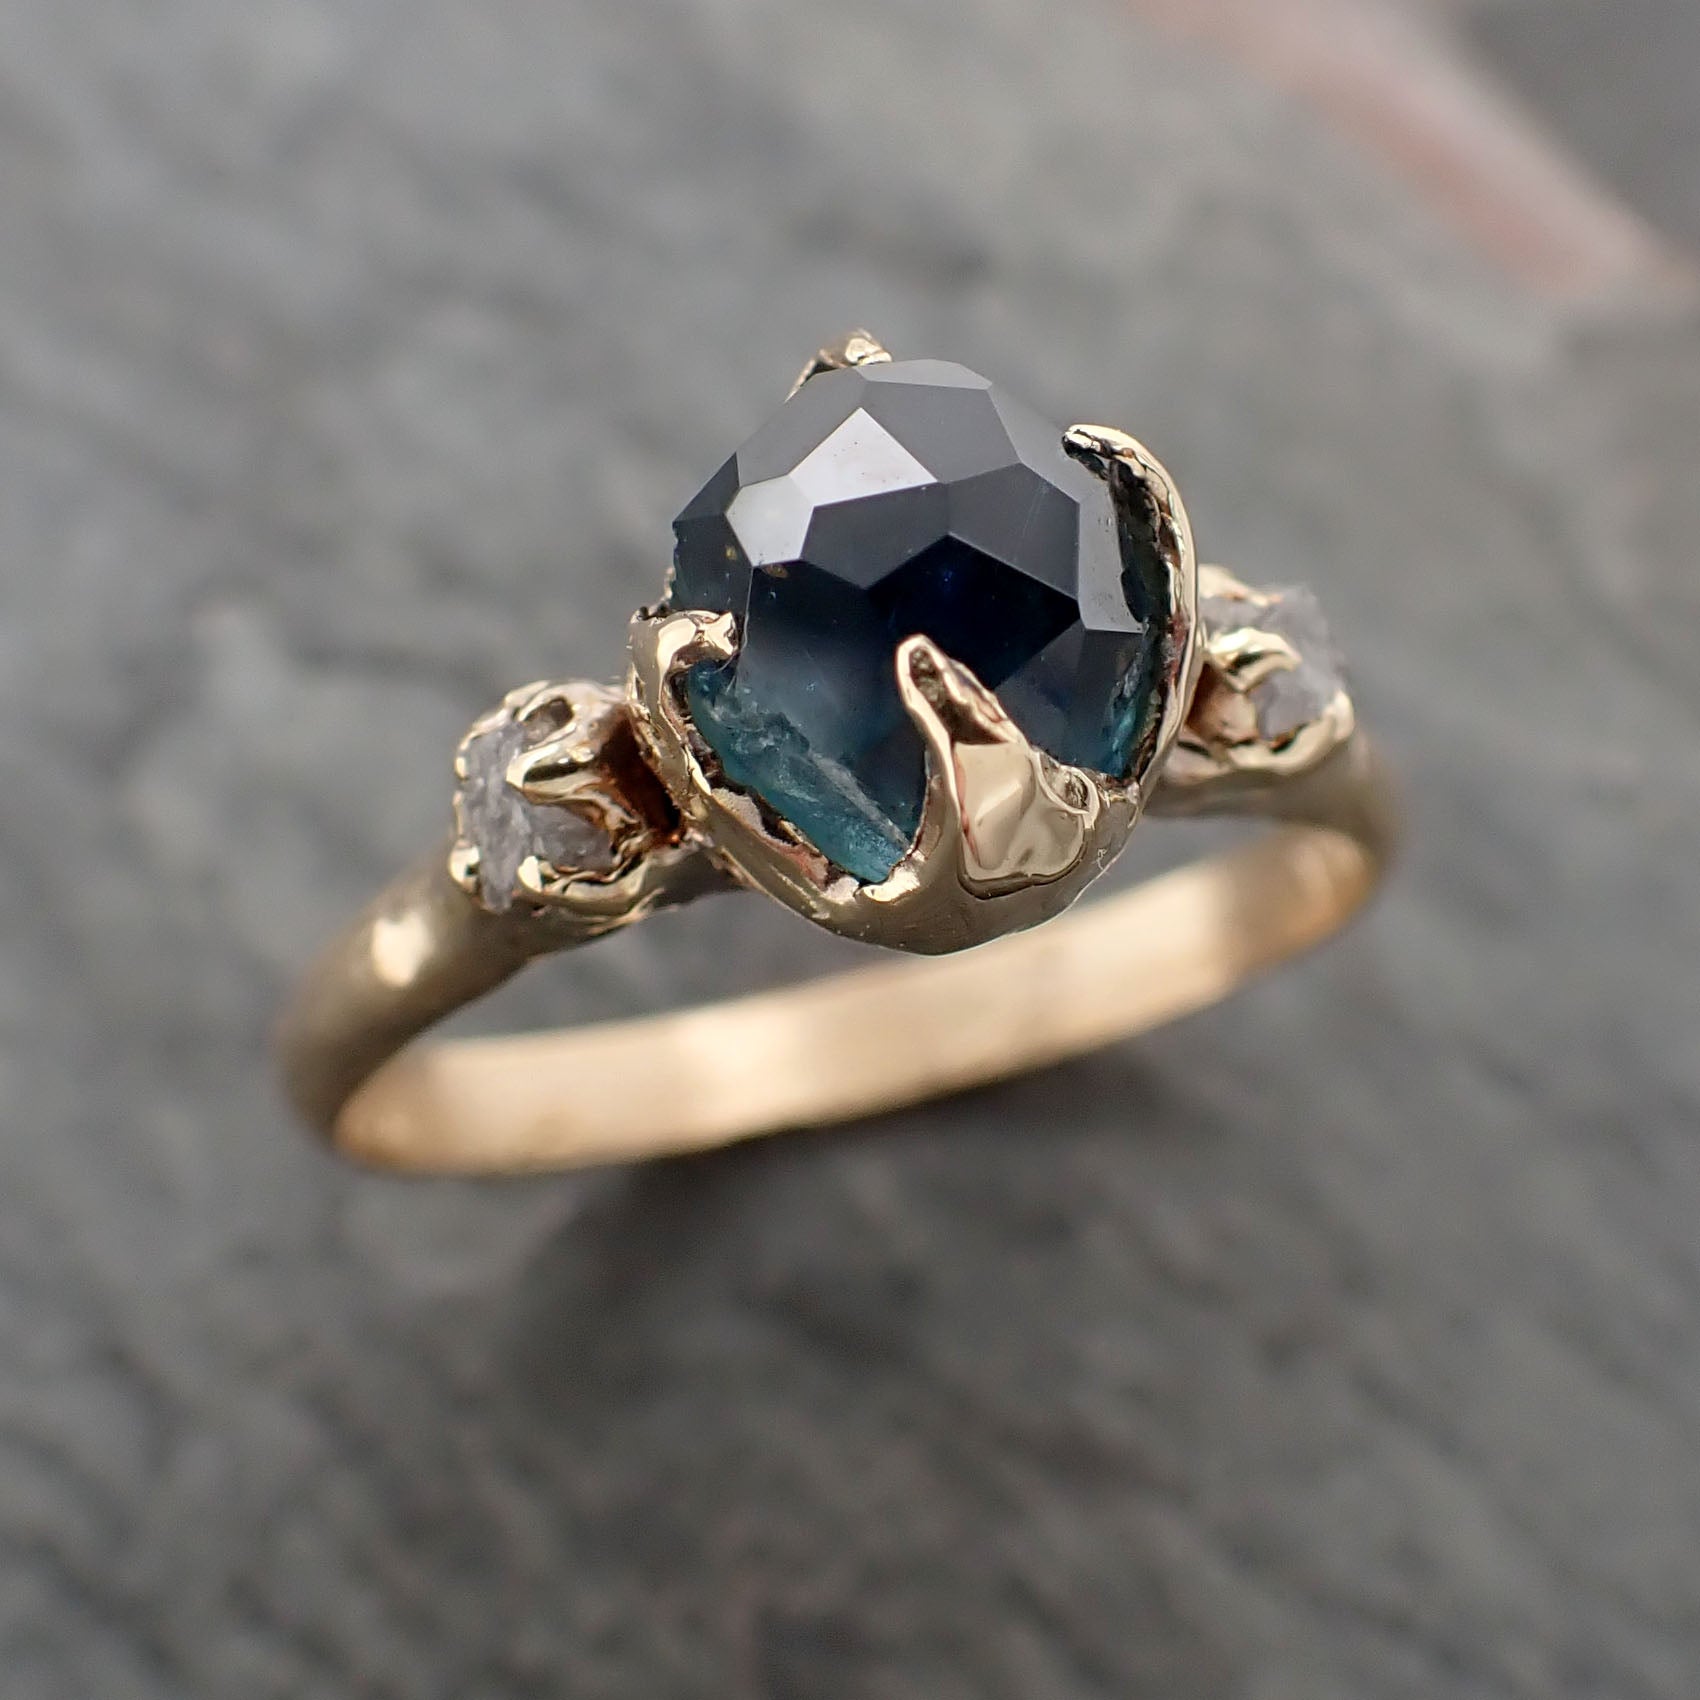 partially faceted blue montana sapphire diamond 18k yellow gold engagement ring wedding ring custom one of a kind blue gemstone ring multi stone ring 2353 Alternative Engagement